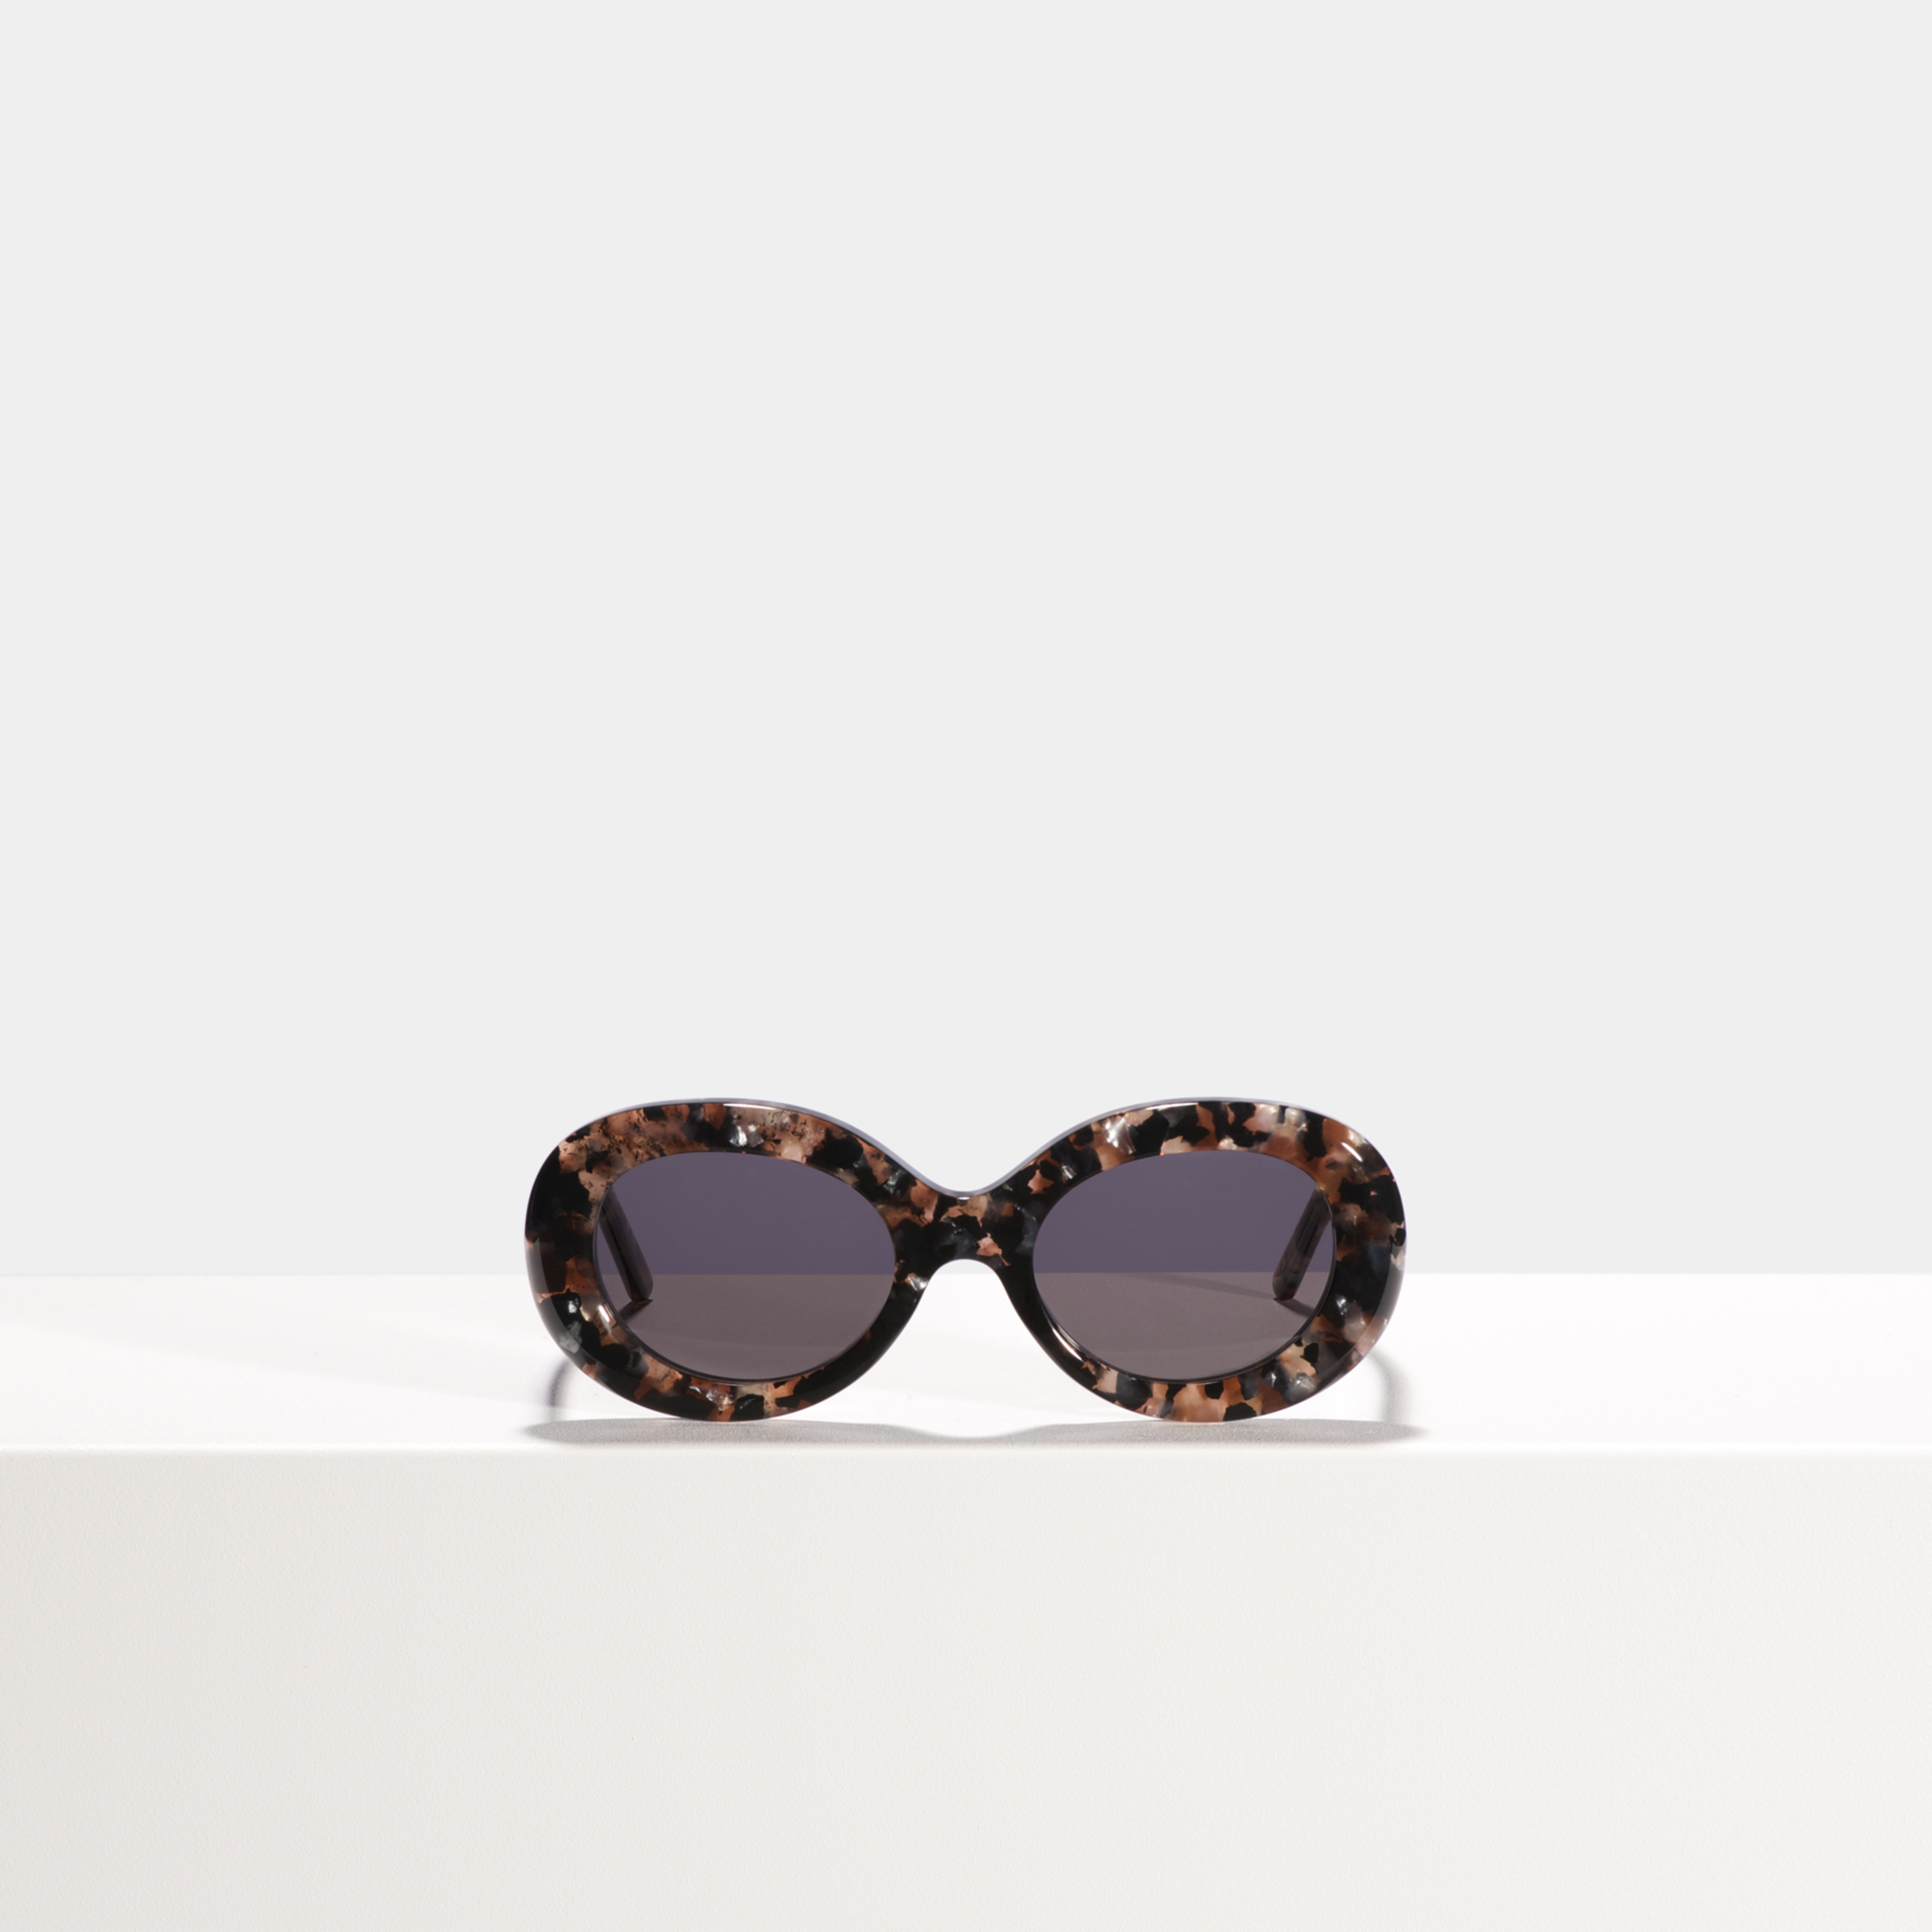 Ace & Tate Solaires | oval Acétate in Marron, Rose